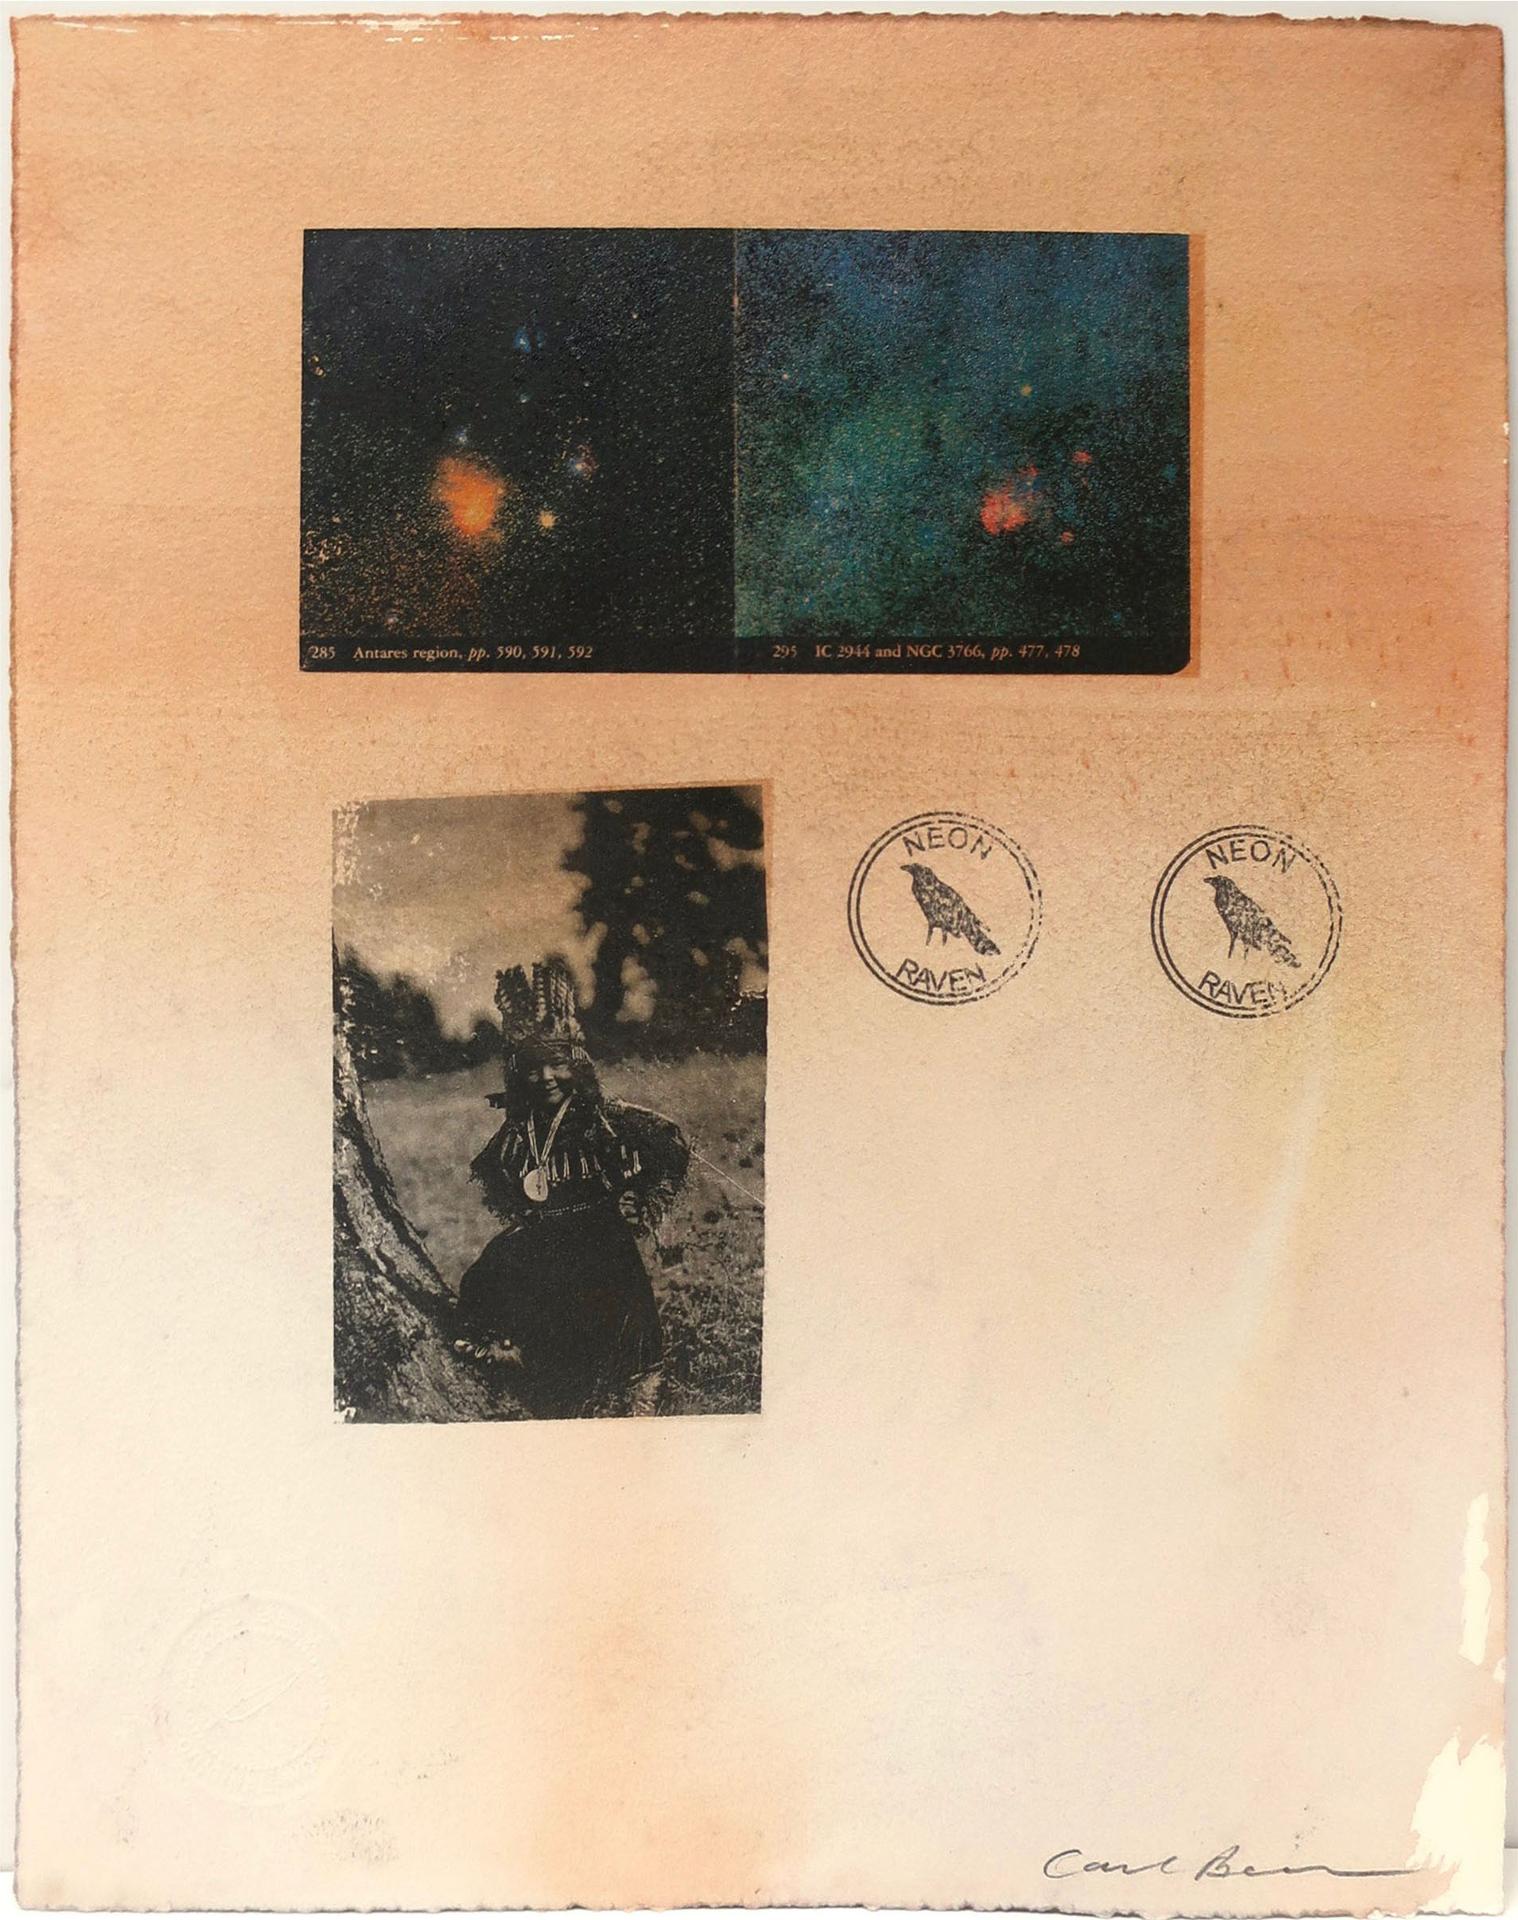 Carl Beam (1943-2005) - Untitled (Antares Region/Jc2944 & Ngc3766/Young Indigenous Child)